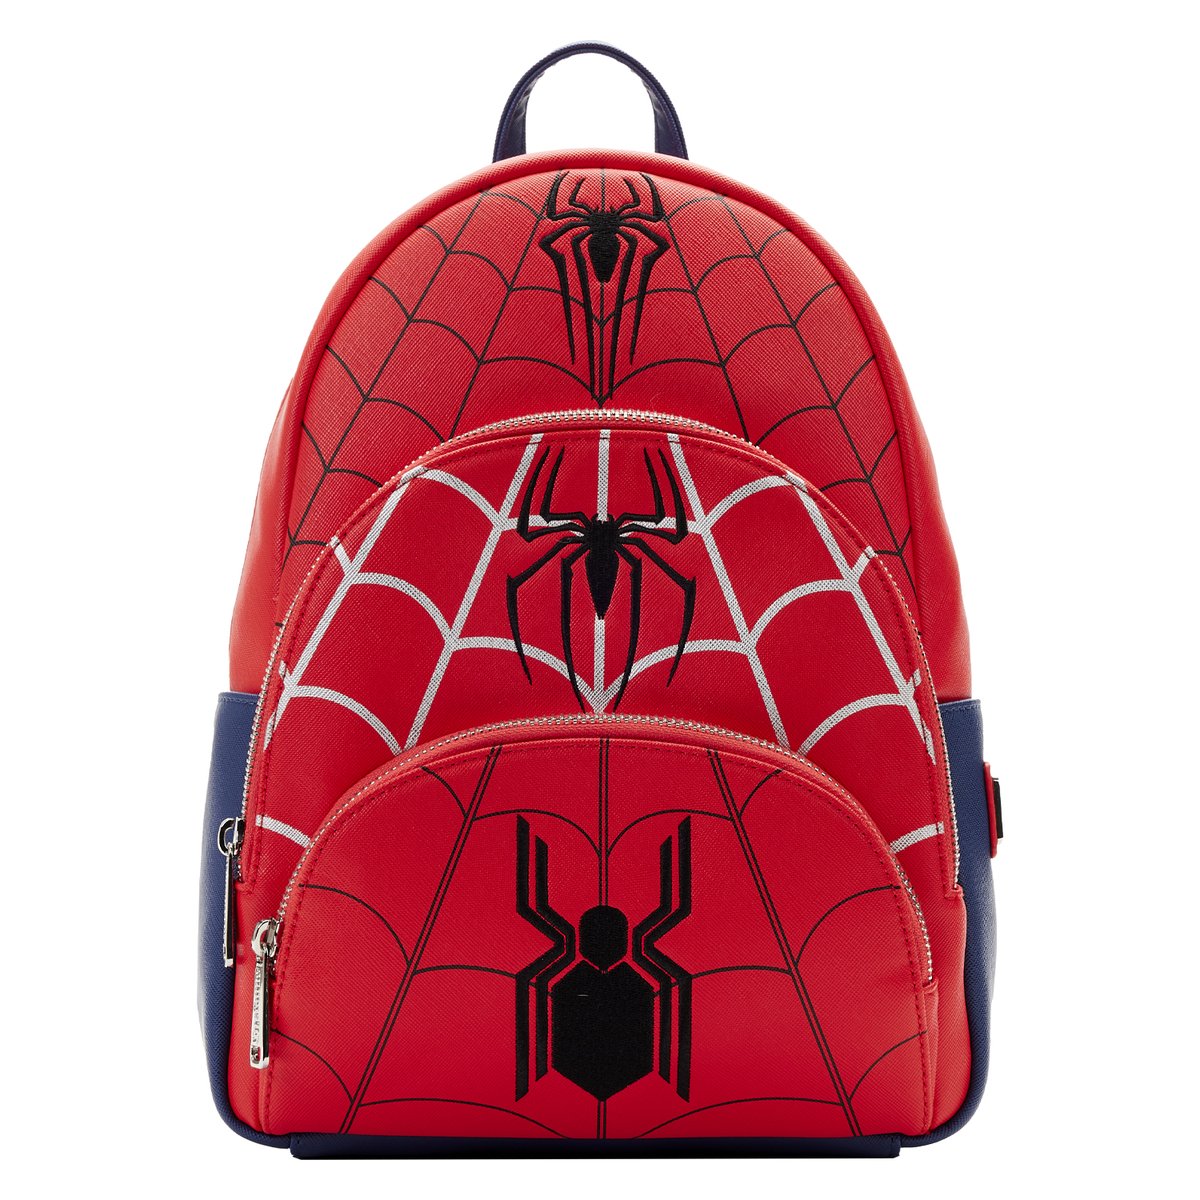 RT @rachmeetsworld: this spider-man backpack going SO HARD https://t.co/0IfxtQxgCc